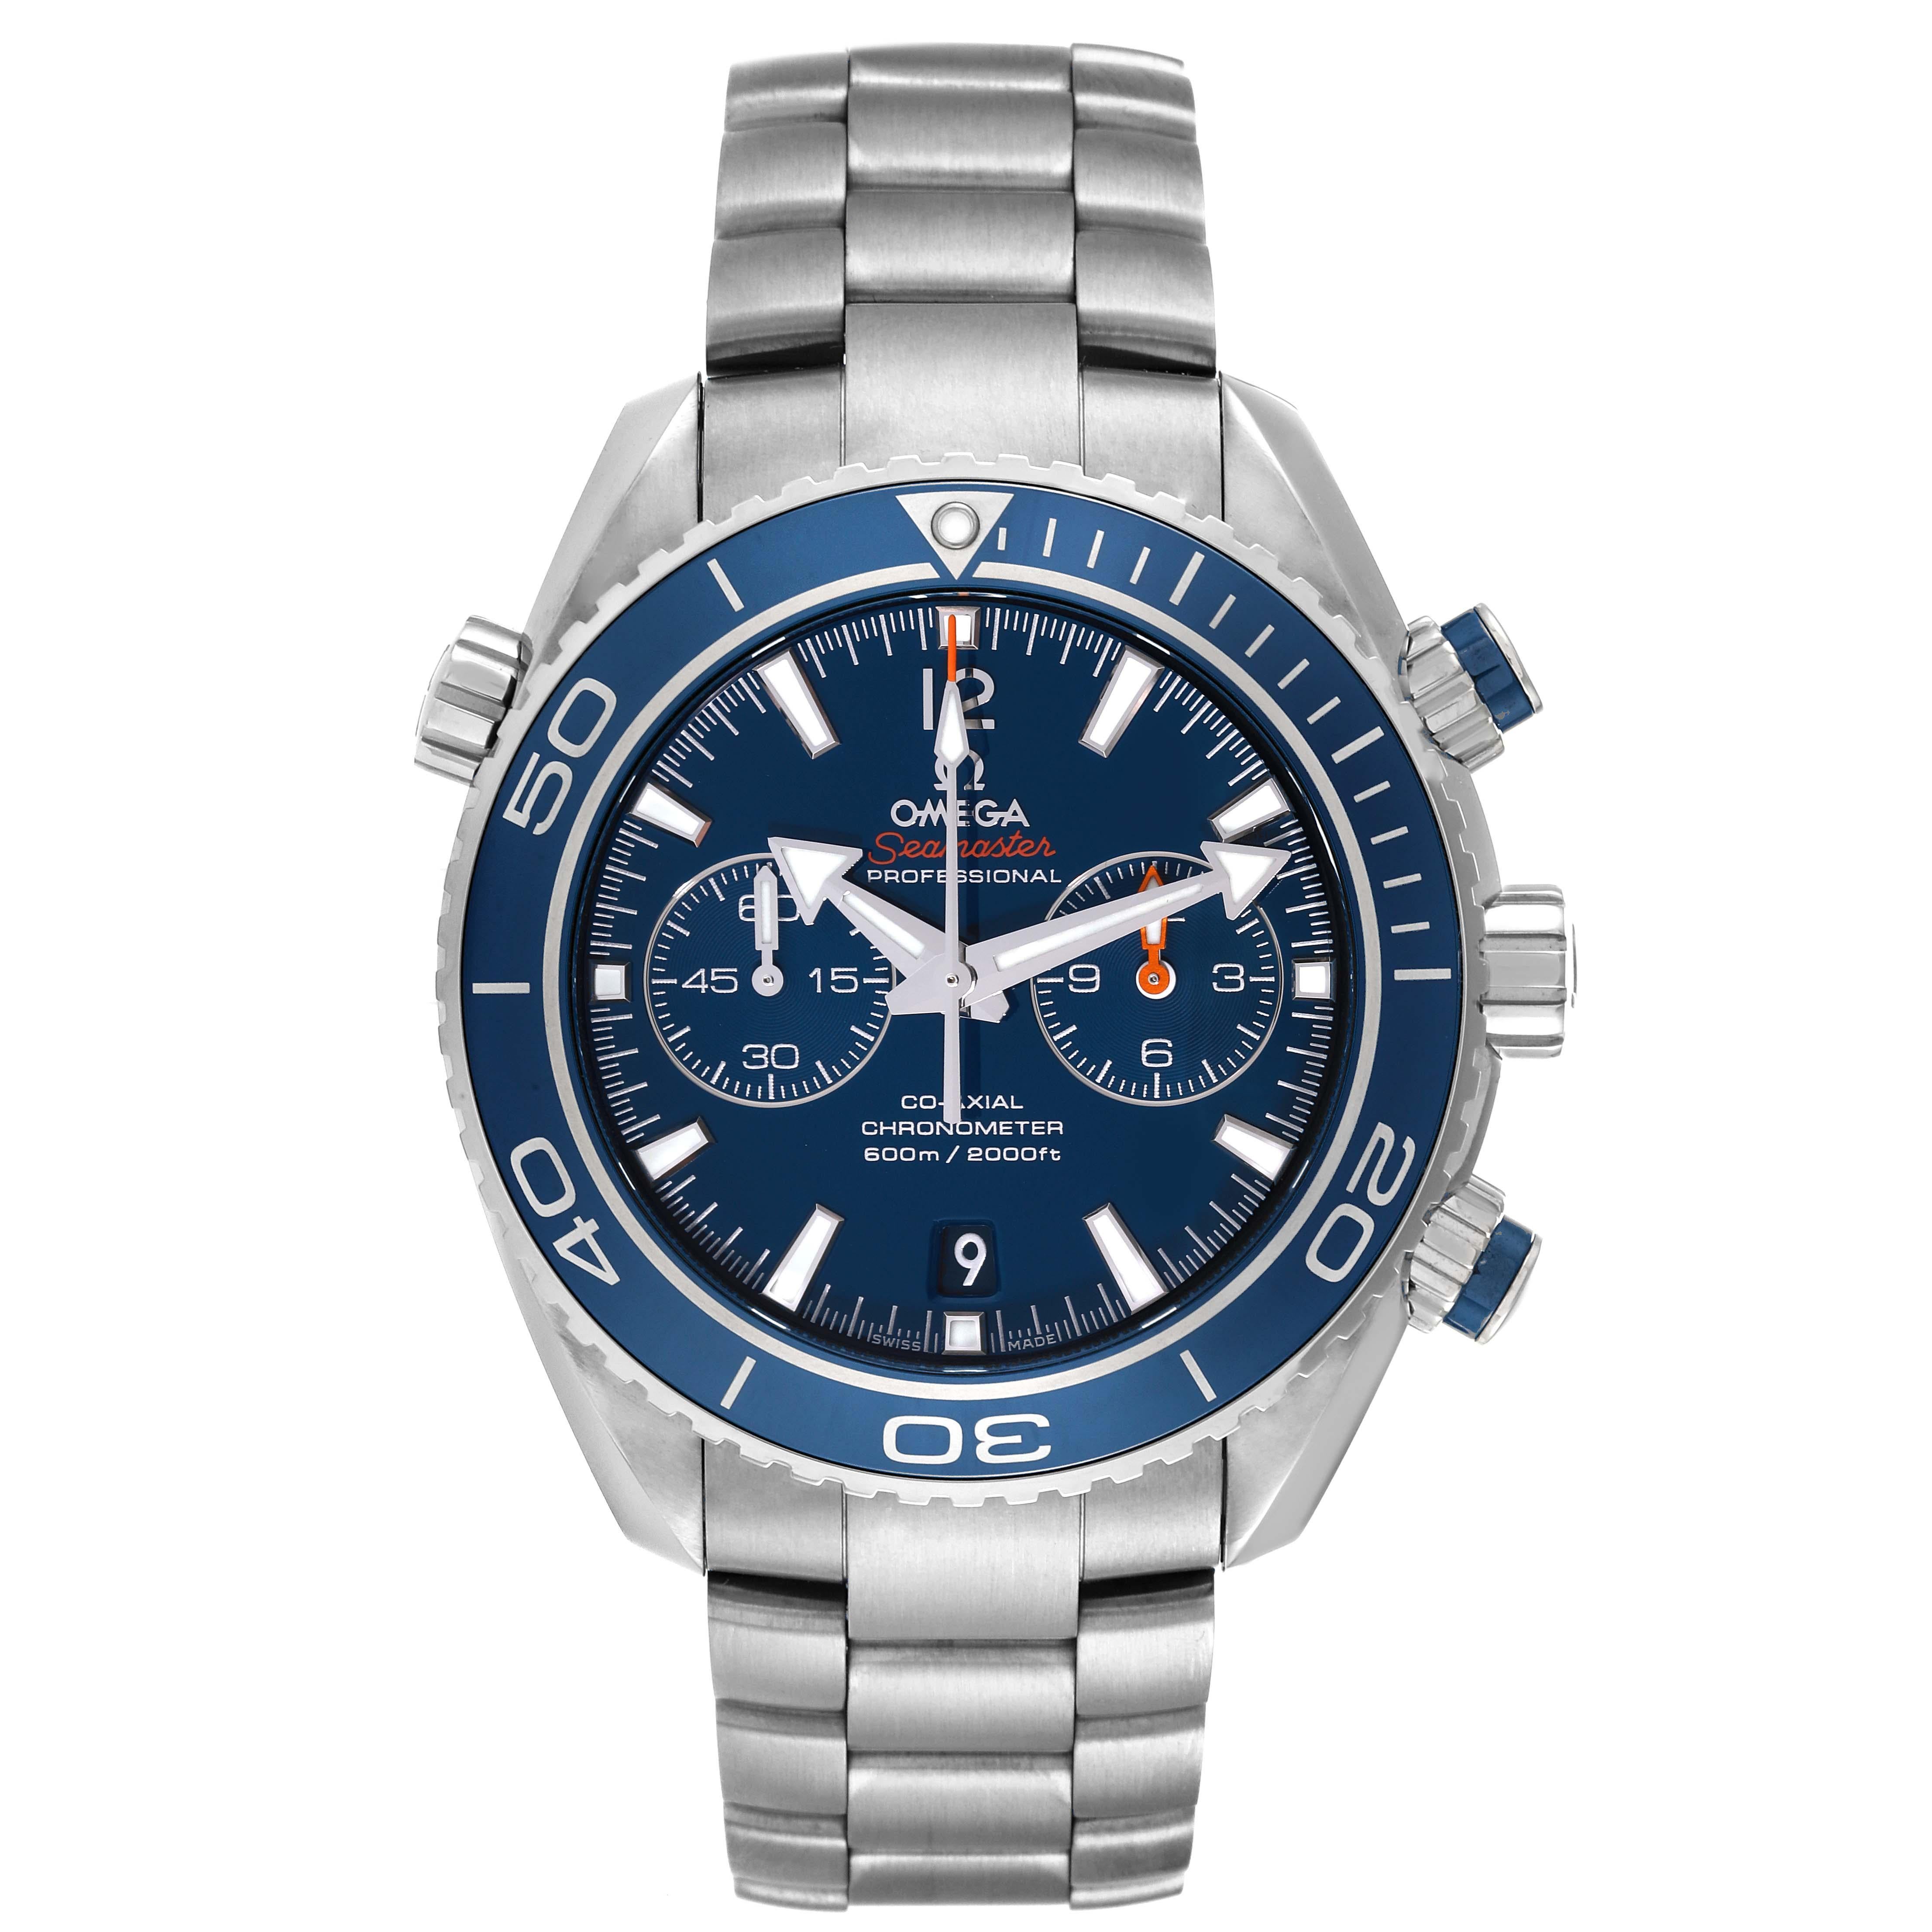 Omega Planet Ocean Chronograph Titanium Mens Watch 232.90.46.51.03.001 Box Card. Automatic self-winding chronometer movement with Co-Axial Escapement for greater precision, stability and durability. Silicon balance spring on free sprung balance, 2